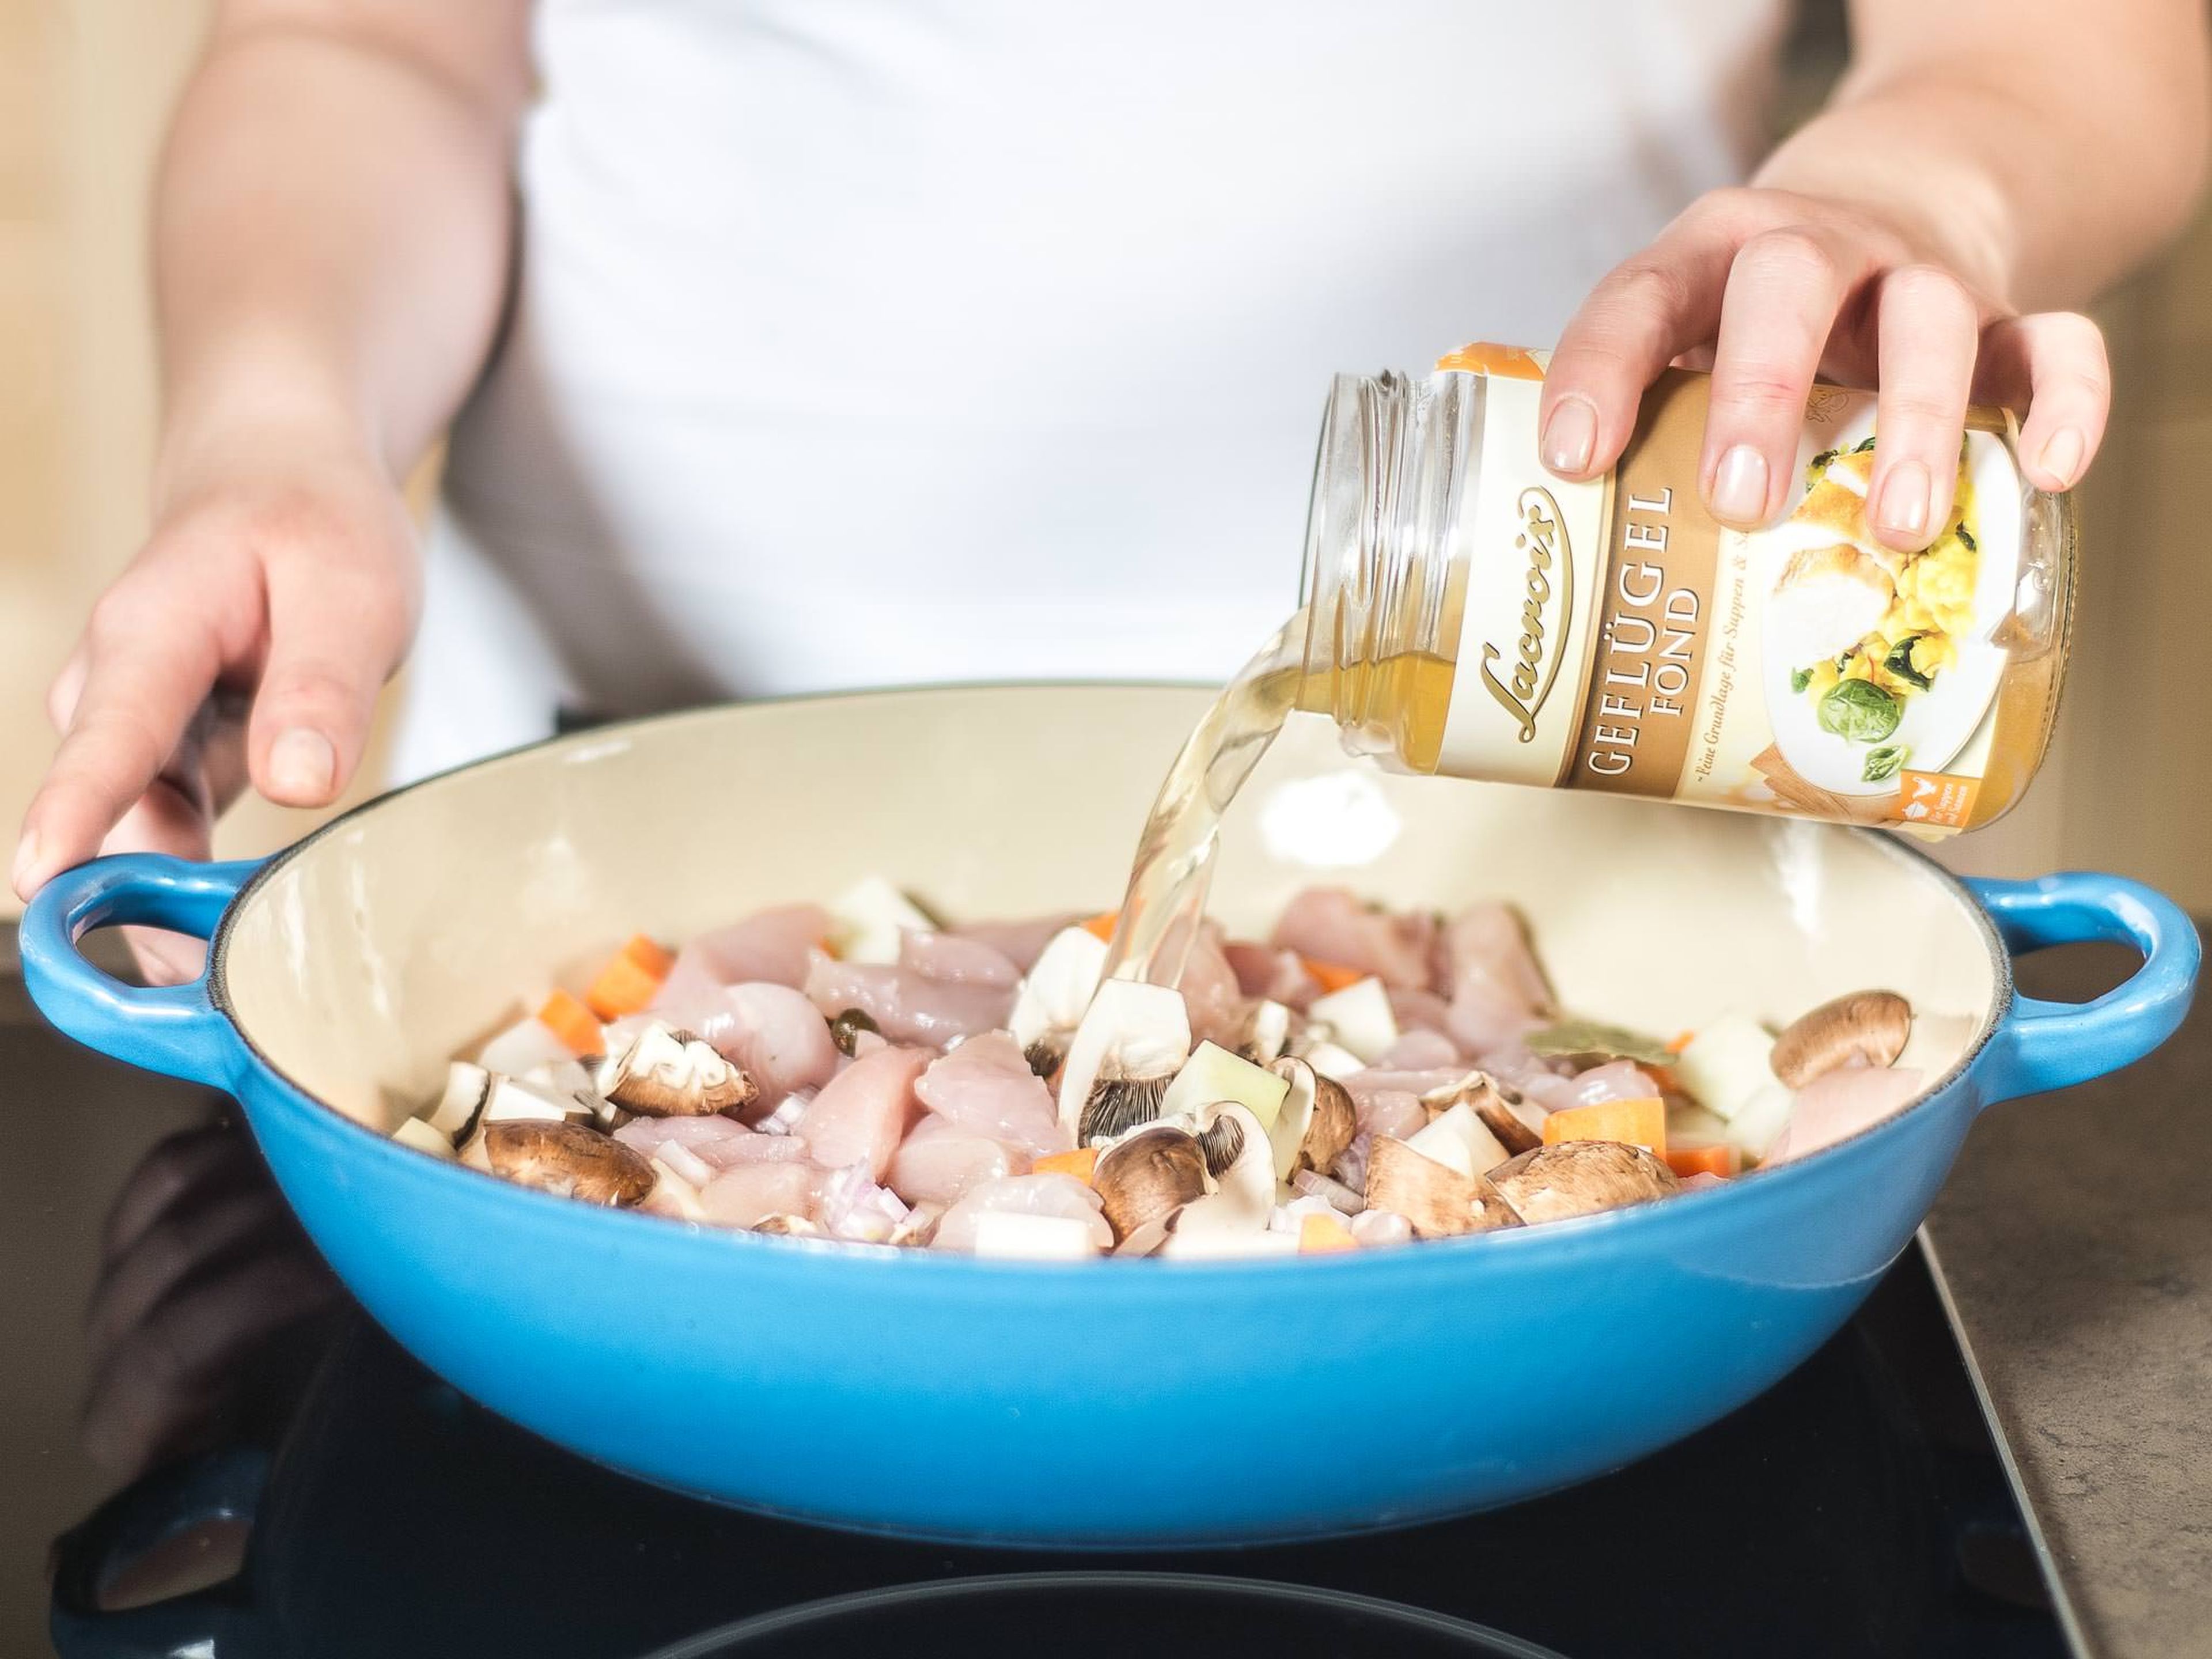 Place mushrooms, chopped shallot, carrot, kohlrabi and chicken breast into a deep frying pan with the bay leaf, allspice, and pepper corns. Fill up with chicken stock and boil with lid closed for approx. 5 min.